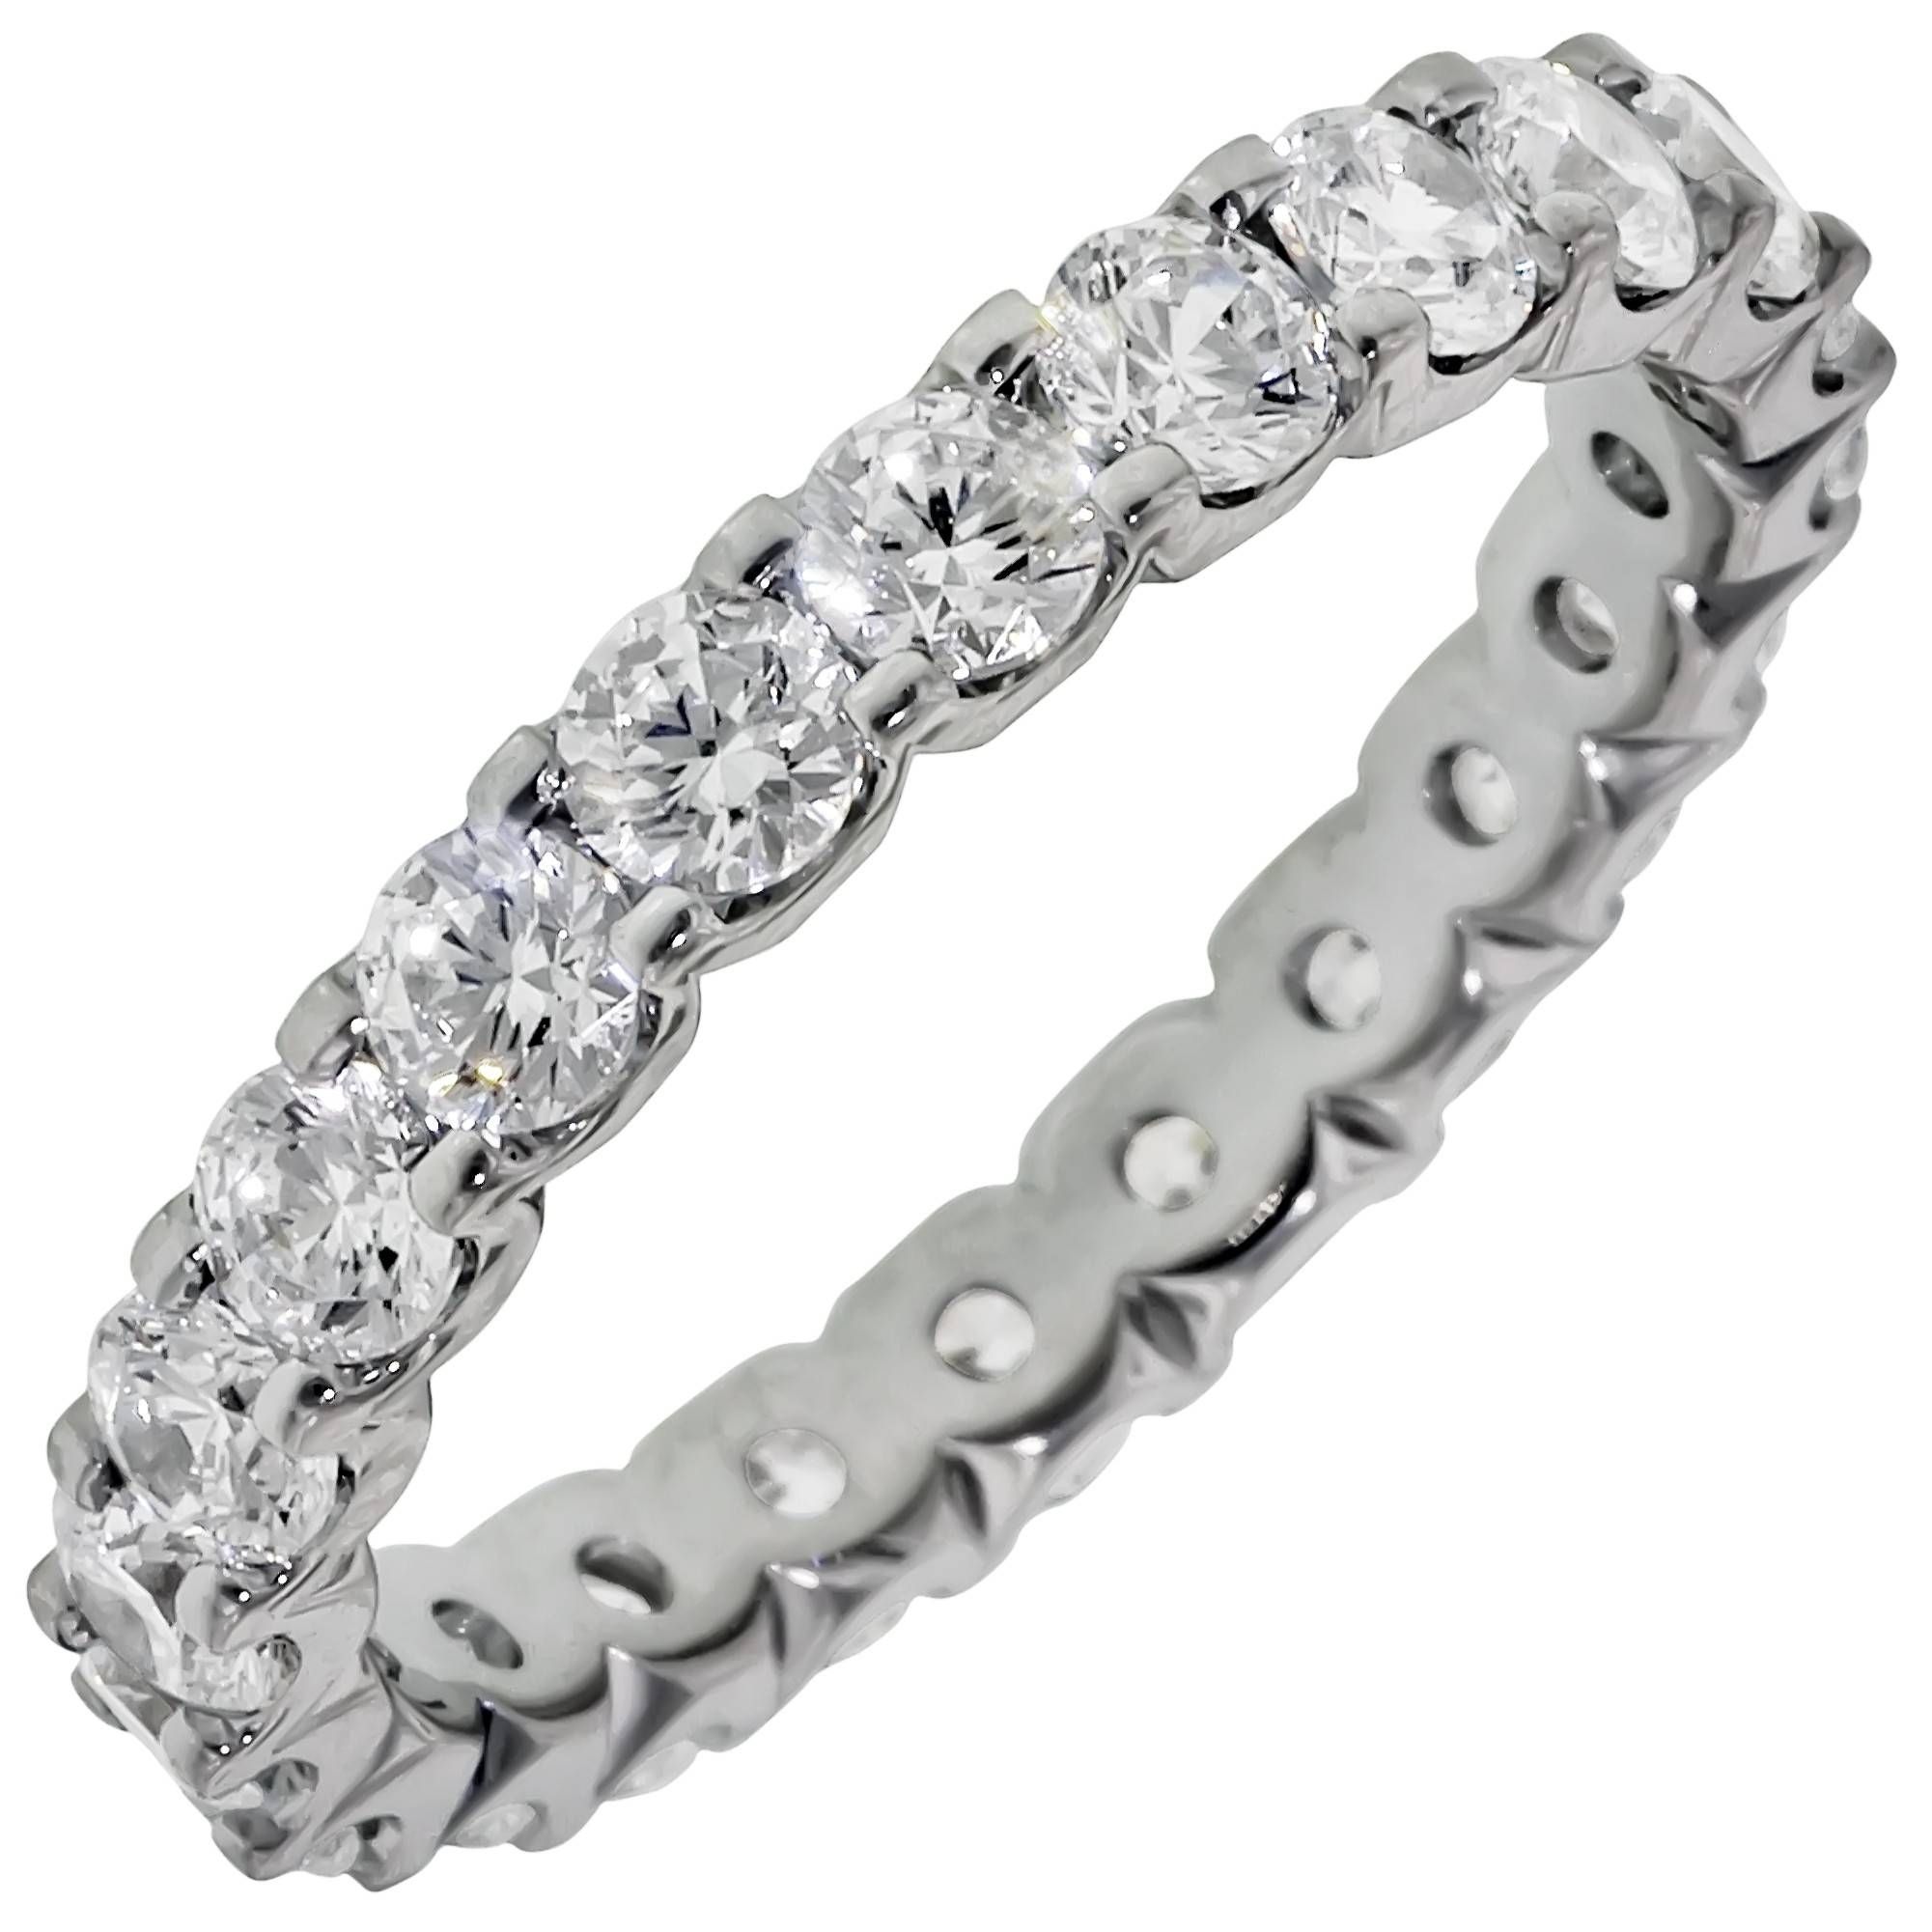 Just Perfect Diamond Eternity Wedding Band In 14kt White Gold (2ct Tw) Regarding 2017 Eternity Wedding Bands (View 5 of 15)